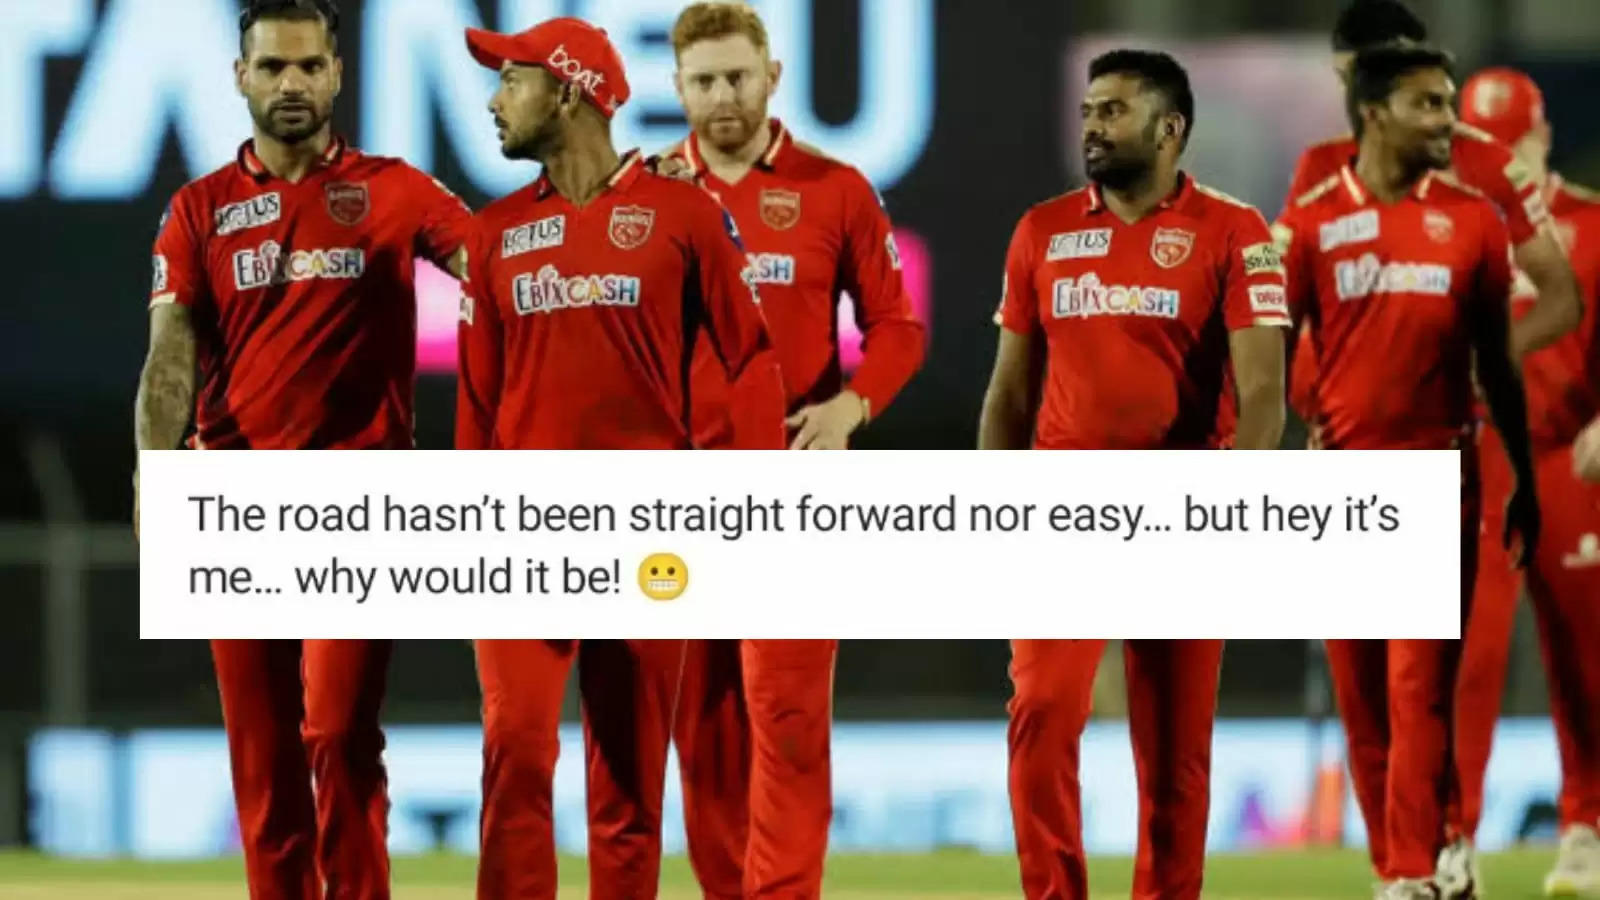 Jonny Bairstow shares an emotional message on Instagram.